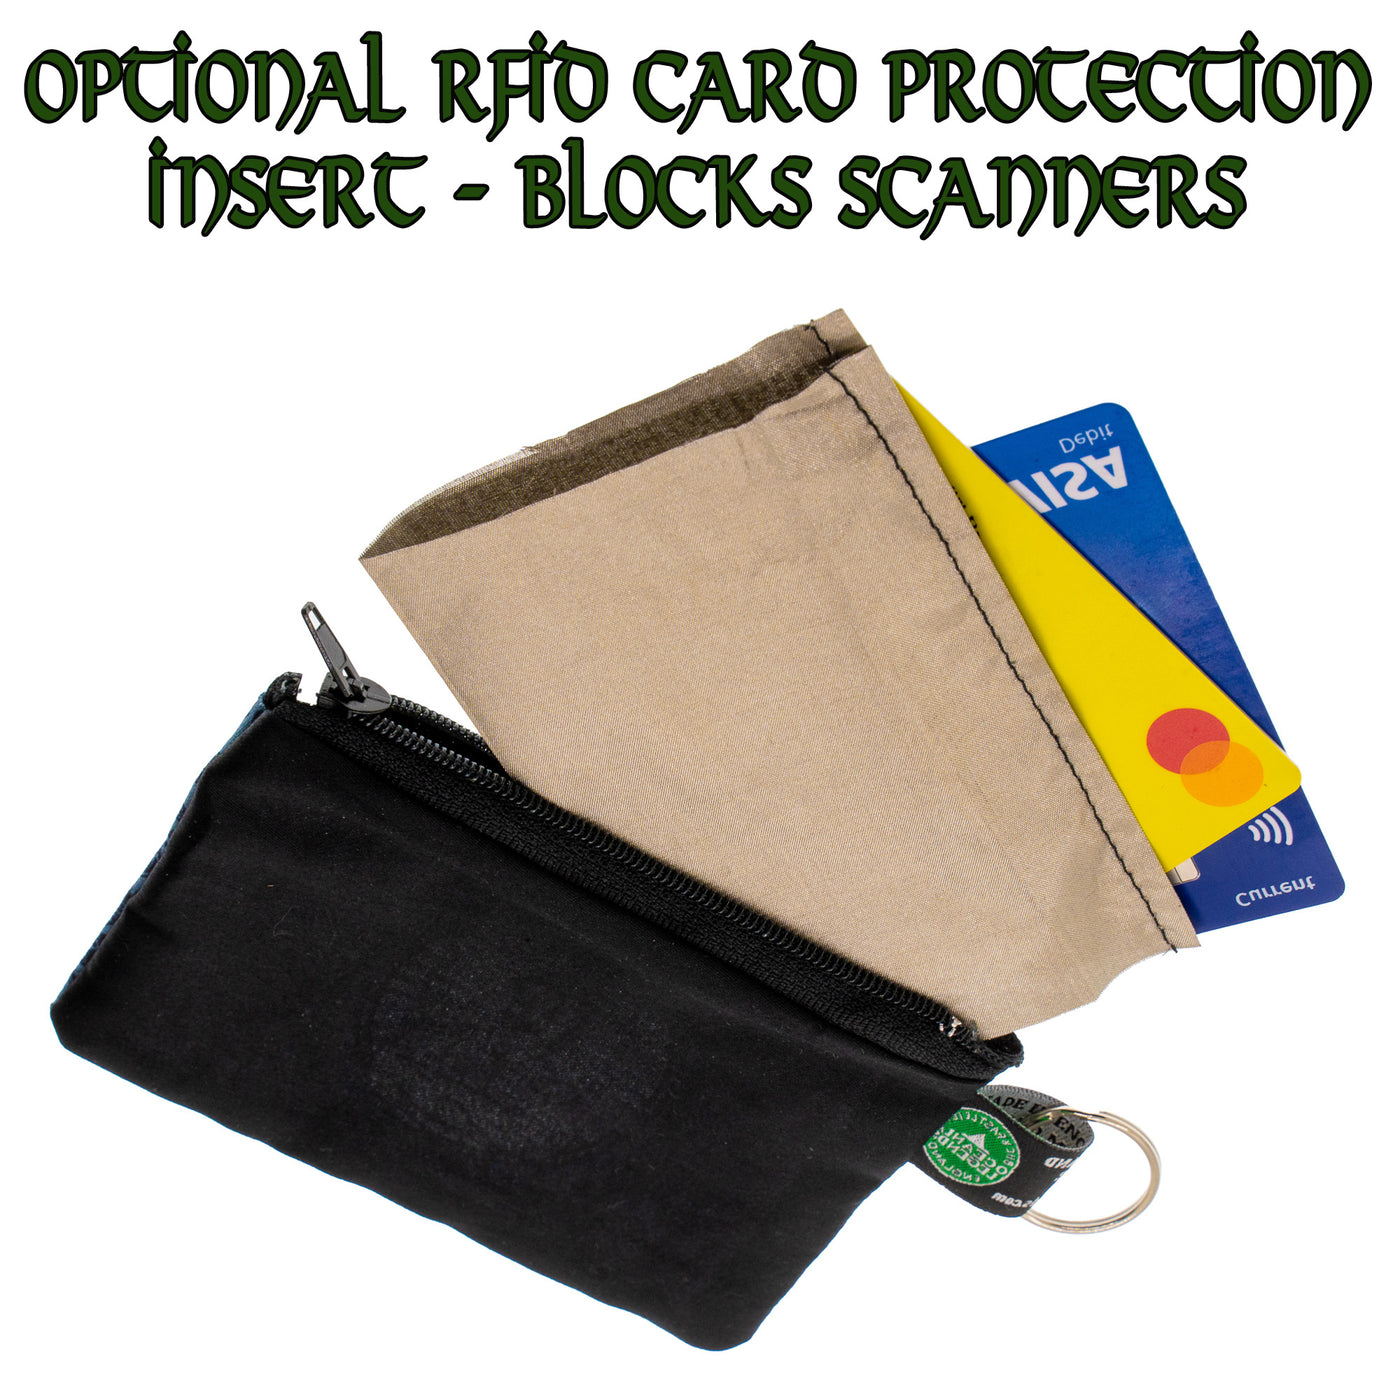 RFID protection sheet to block card scanners